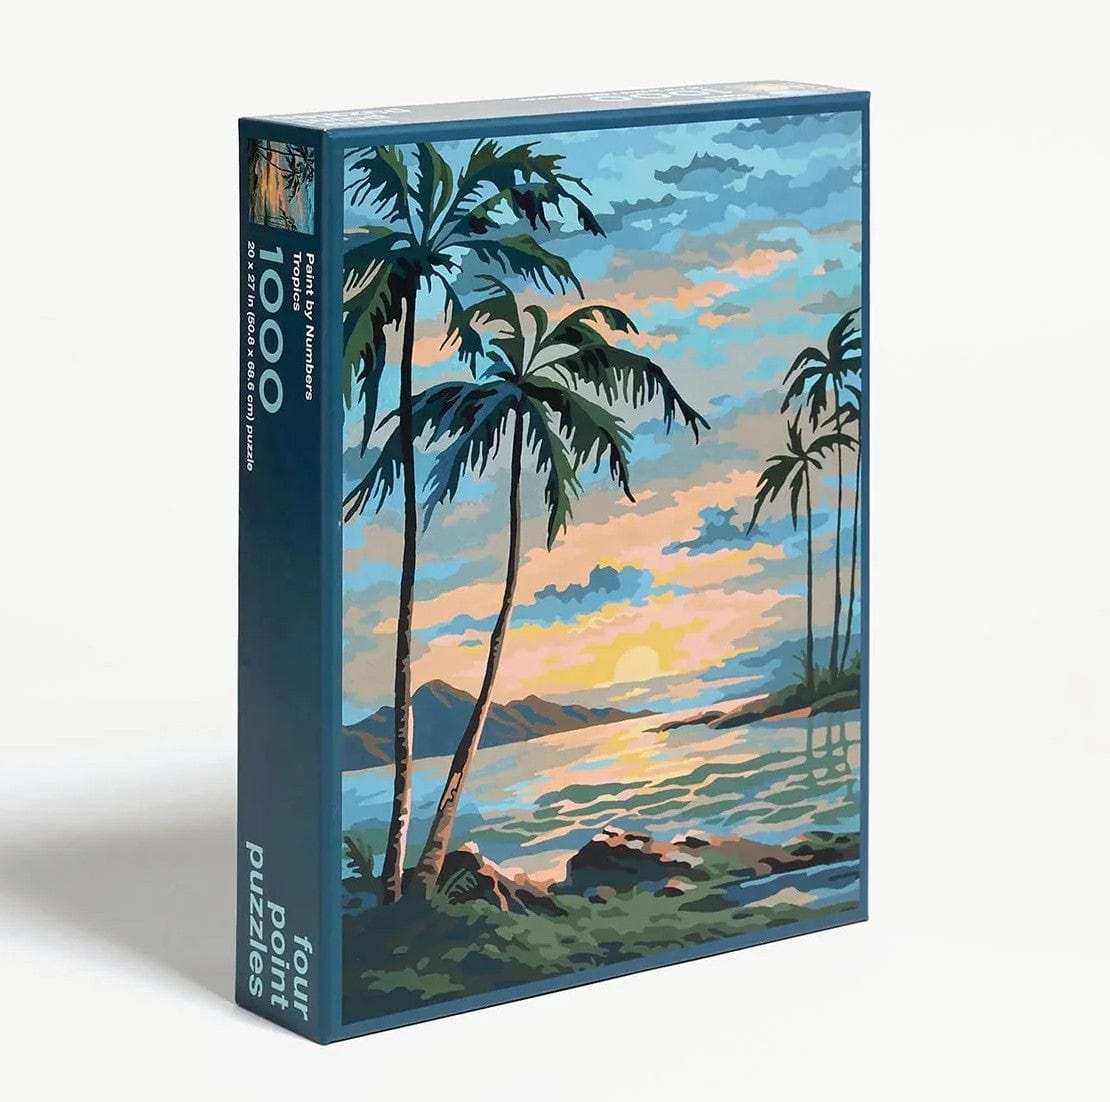 Four Point Puzzles Jigsaw Puzzle for adults TROPICS - 1000 pieces Jigsaw Puzzles